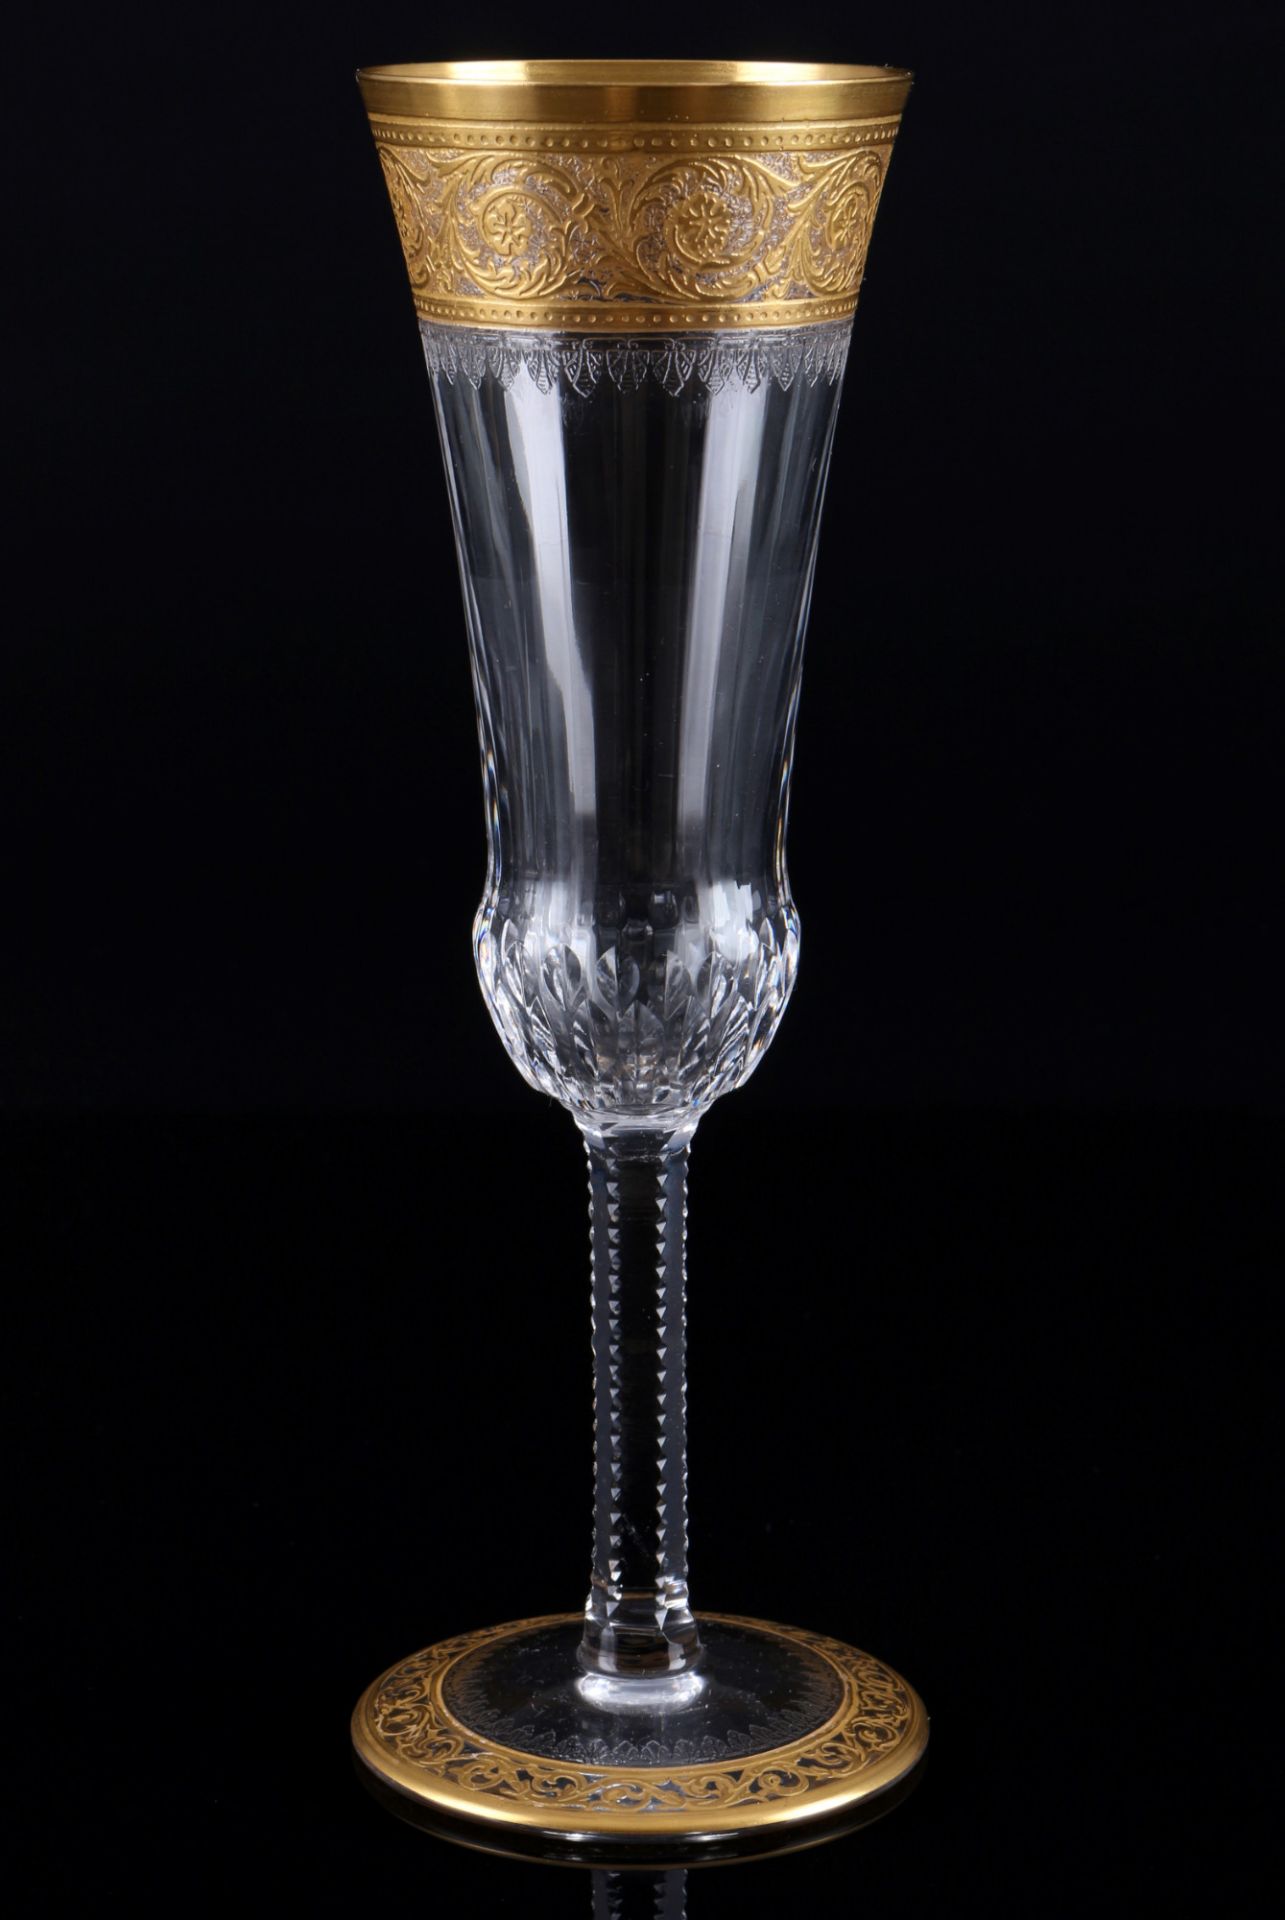 St. Louis Thistle Gold 6 champagne flutes, Champagnerflöten, - Image 2 of 3